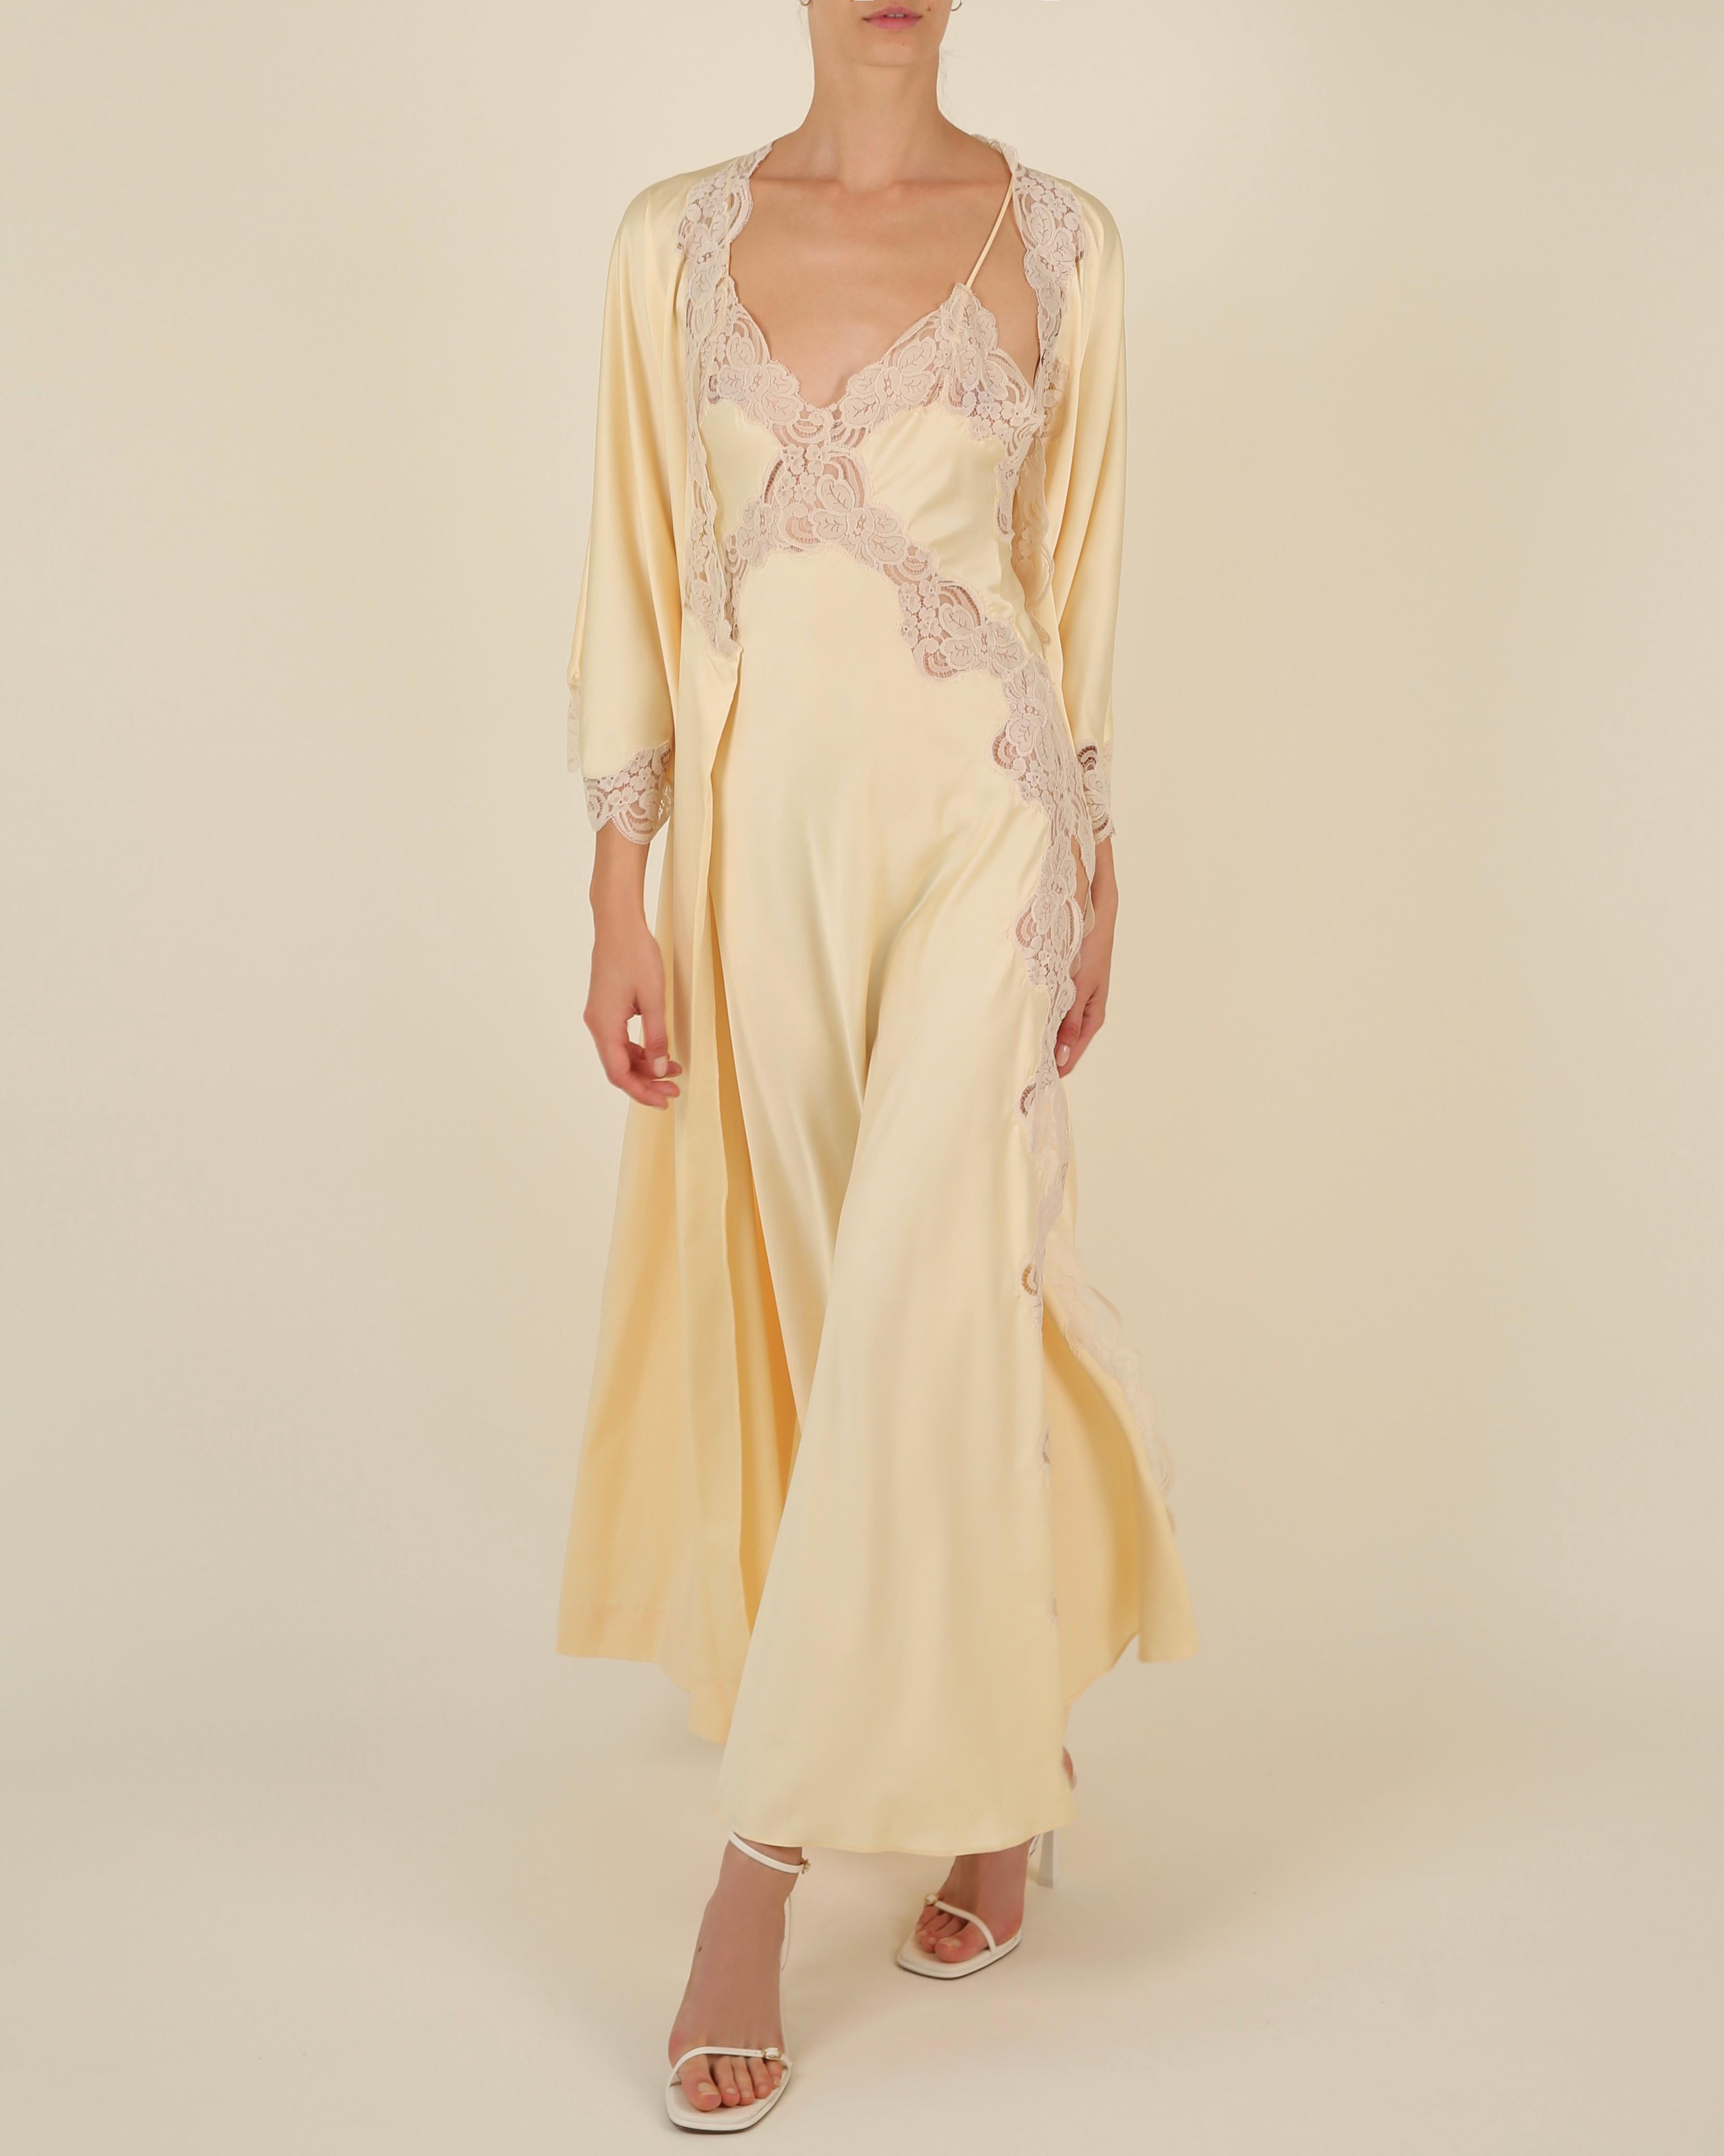 Vintage 1970's silk lace yellow backless thigh slit night gown slip dress & robe 10